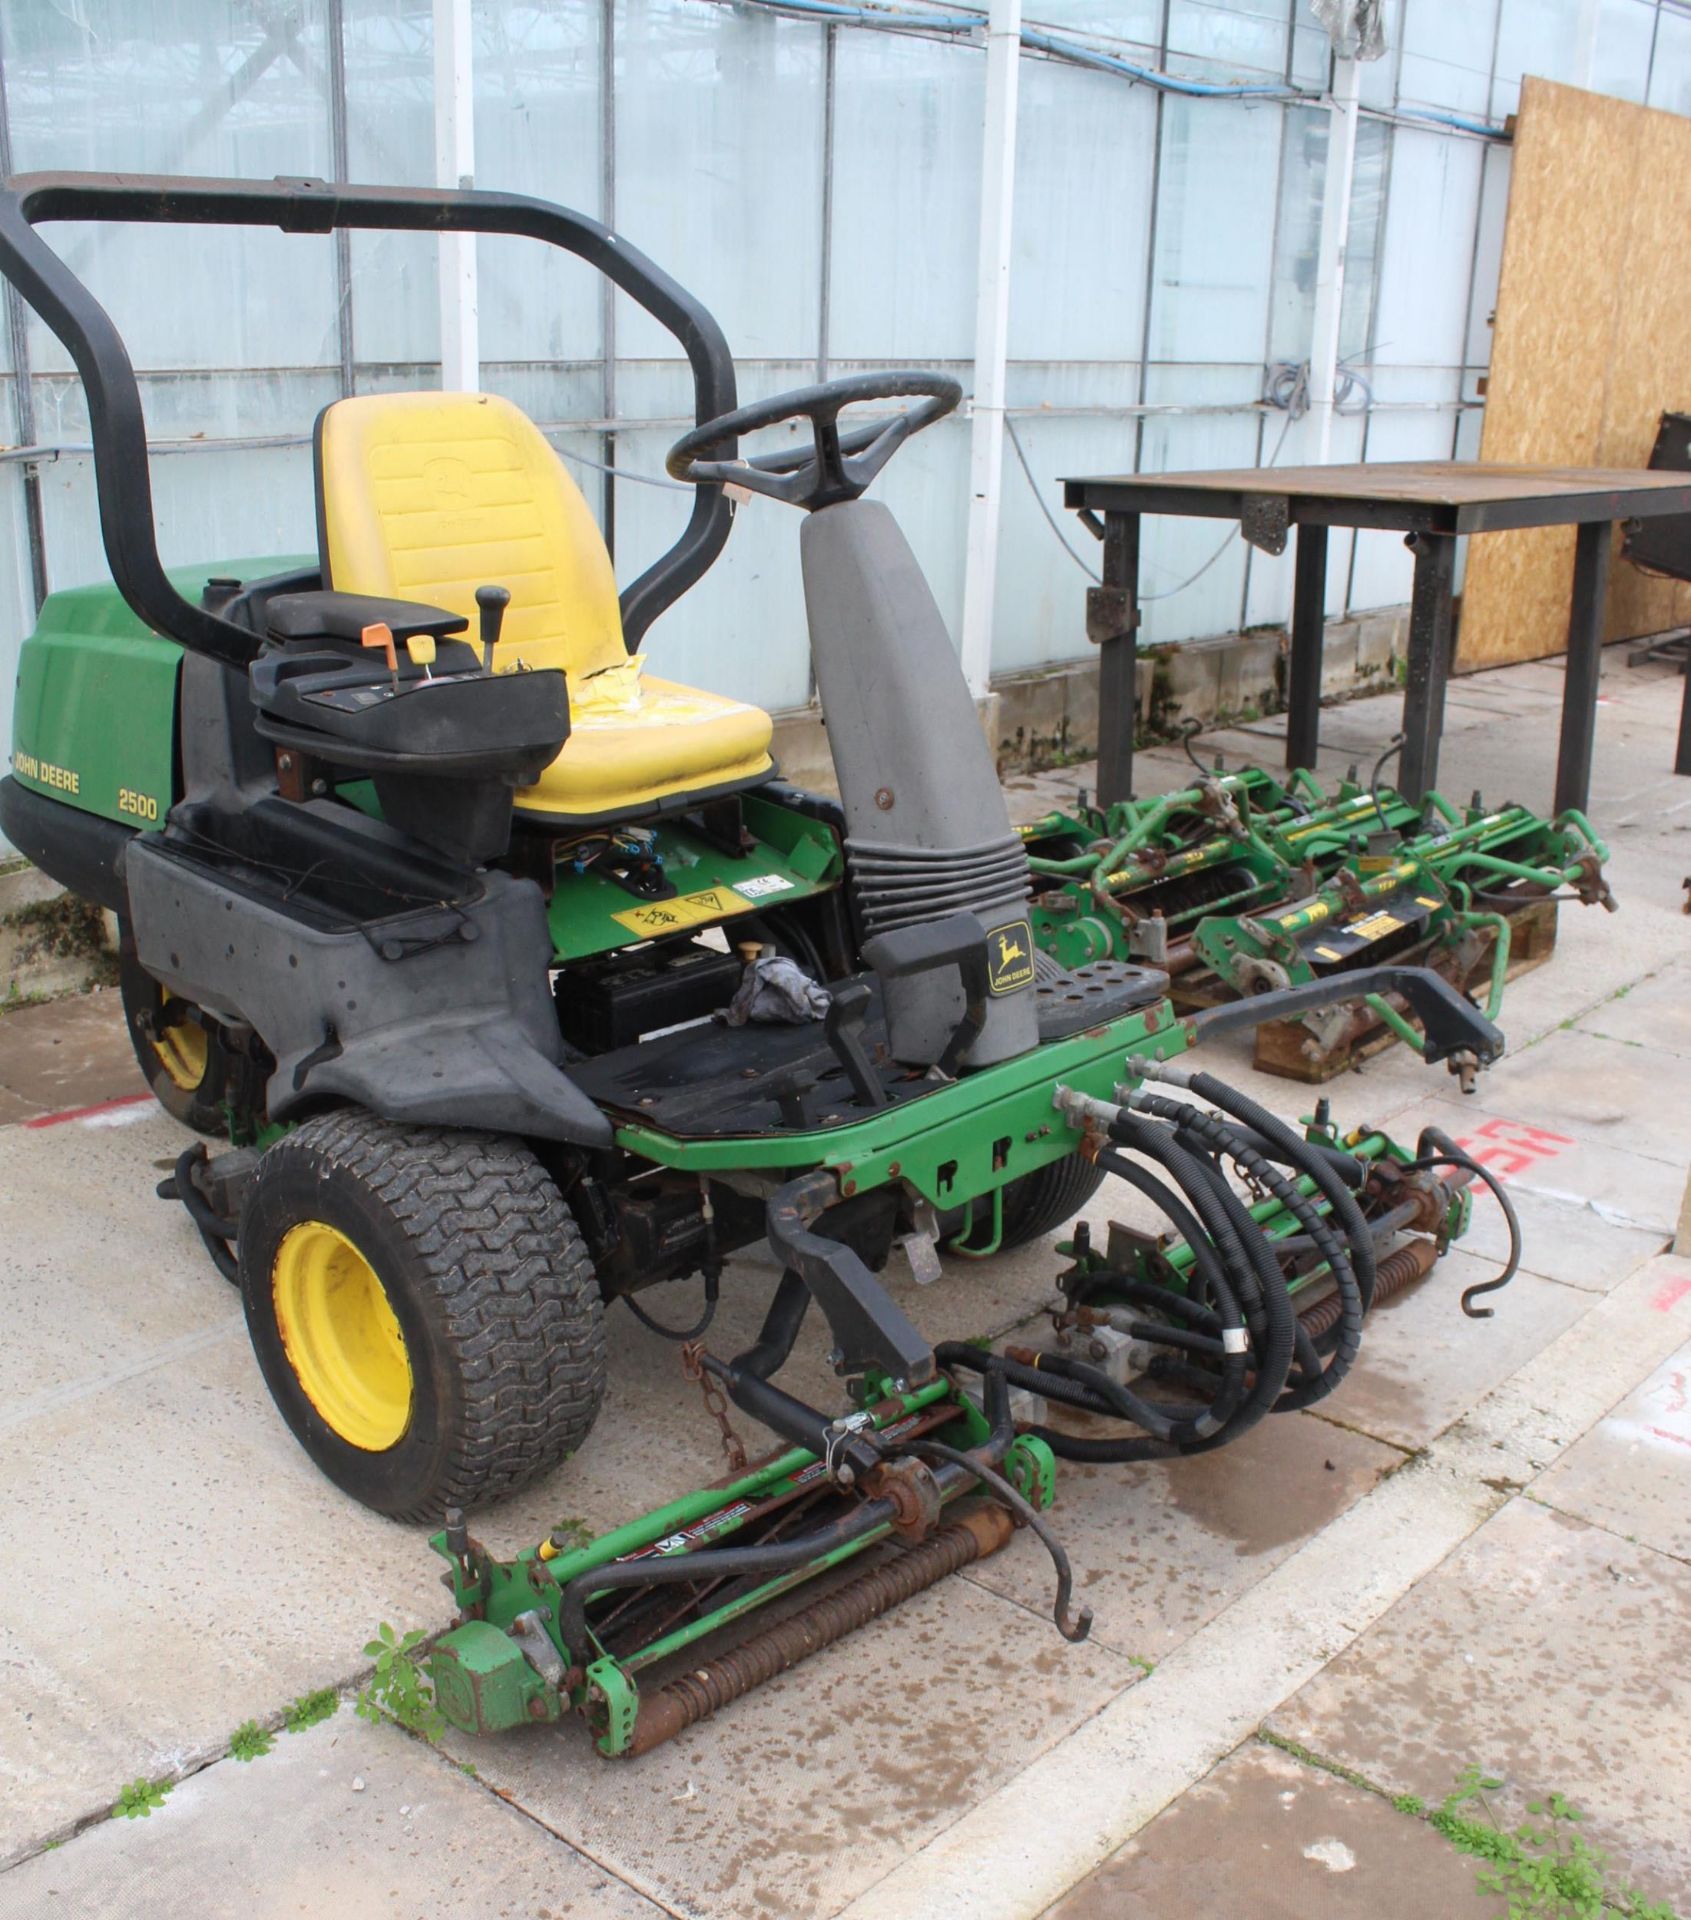 A JOHN DEERE 2500 RIDE ON MOWER COMES WITH SPARE SET OF CUTTING REELS AND A SET OF DE-THATCHER ROLLS